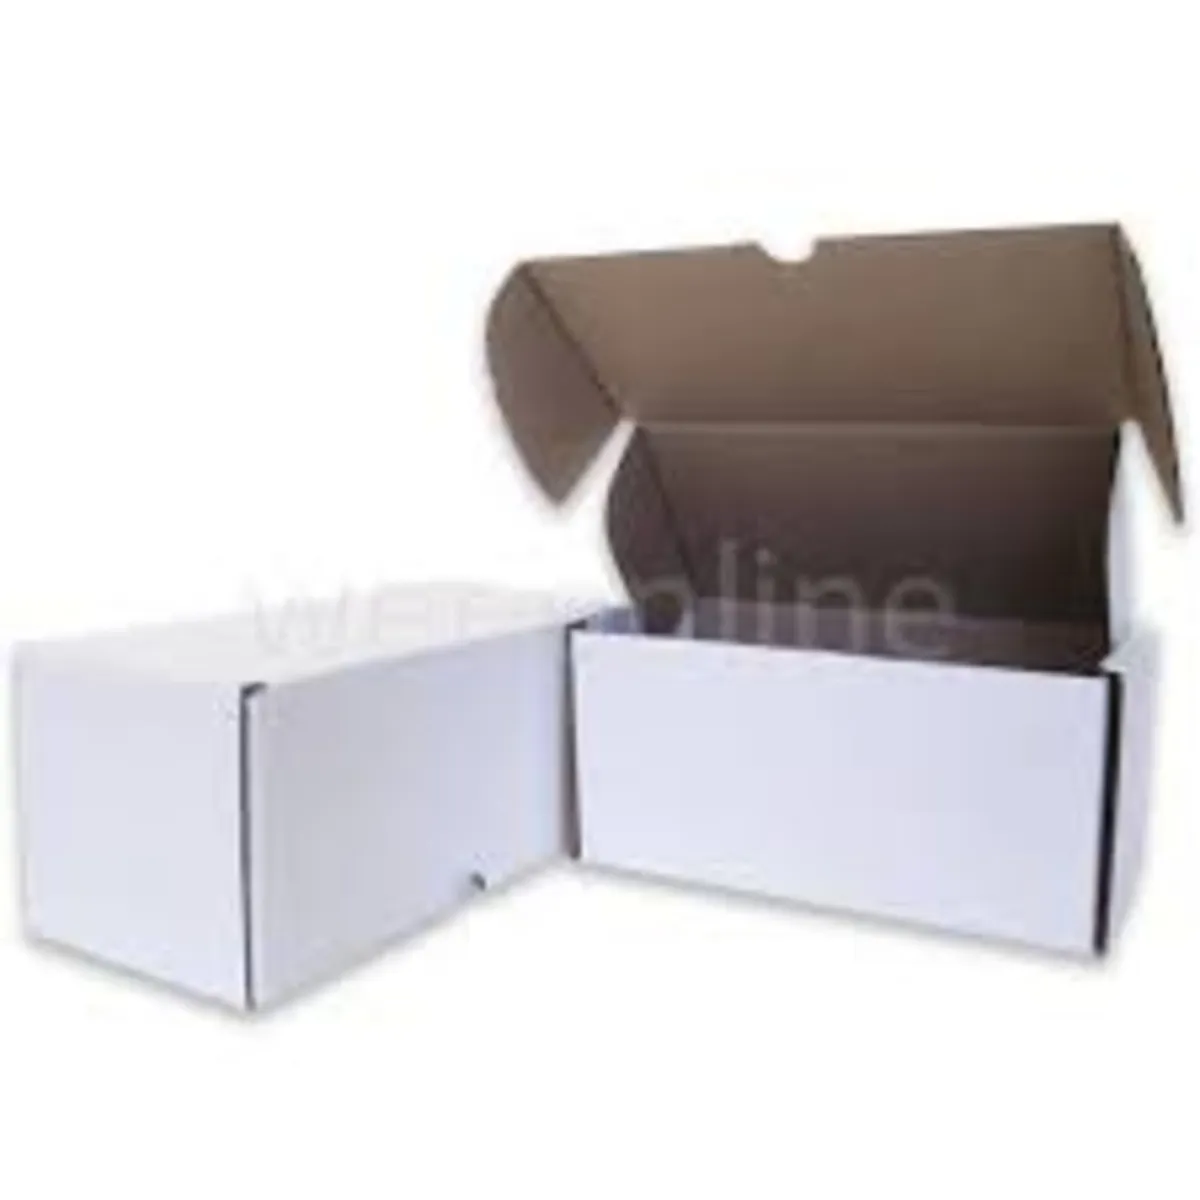 Postal Boxes - 12 Sizes - Packs of 20 and 50